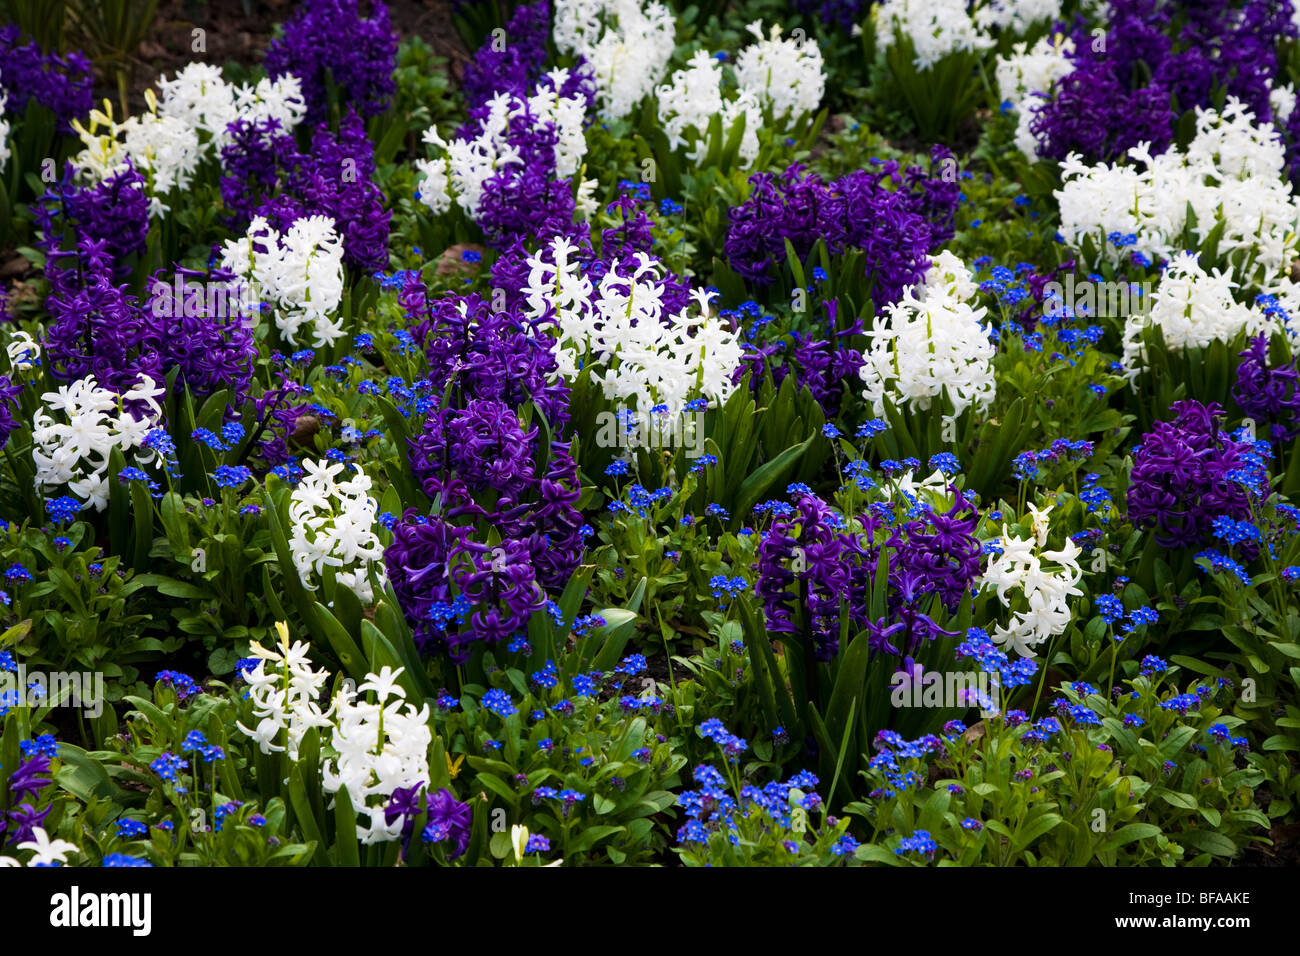 Hyacinths and for-get-me-nots, Gorsnedd gardens, cardiff, Wales, Britain Stock Photo